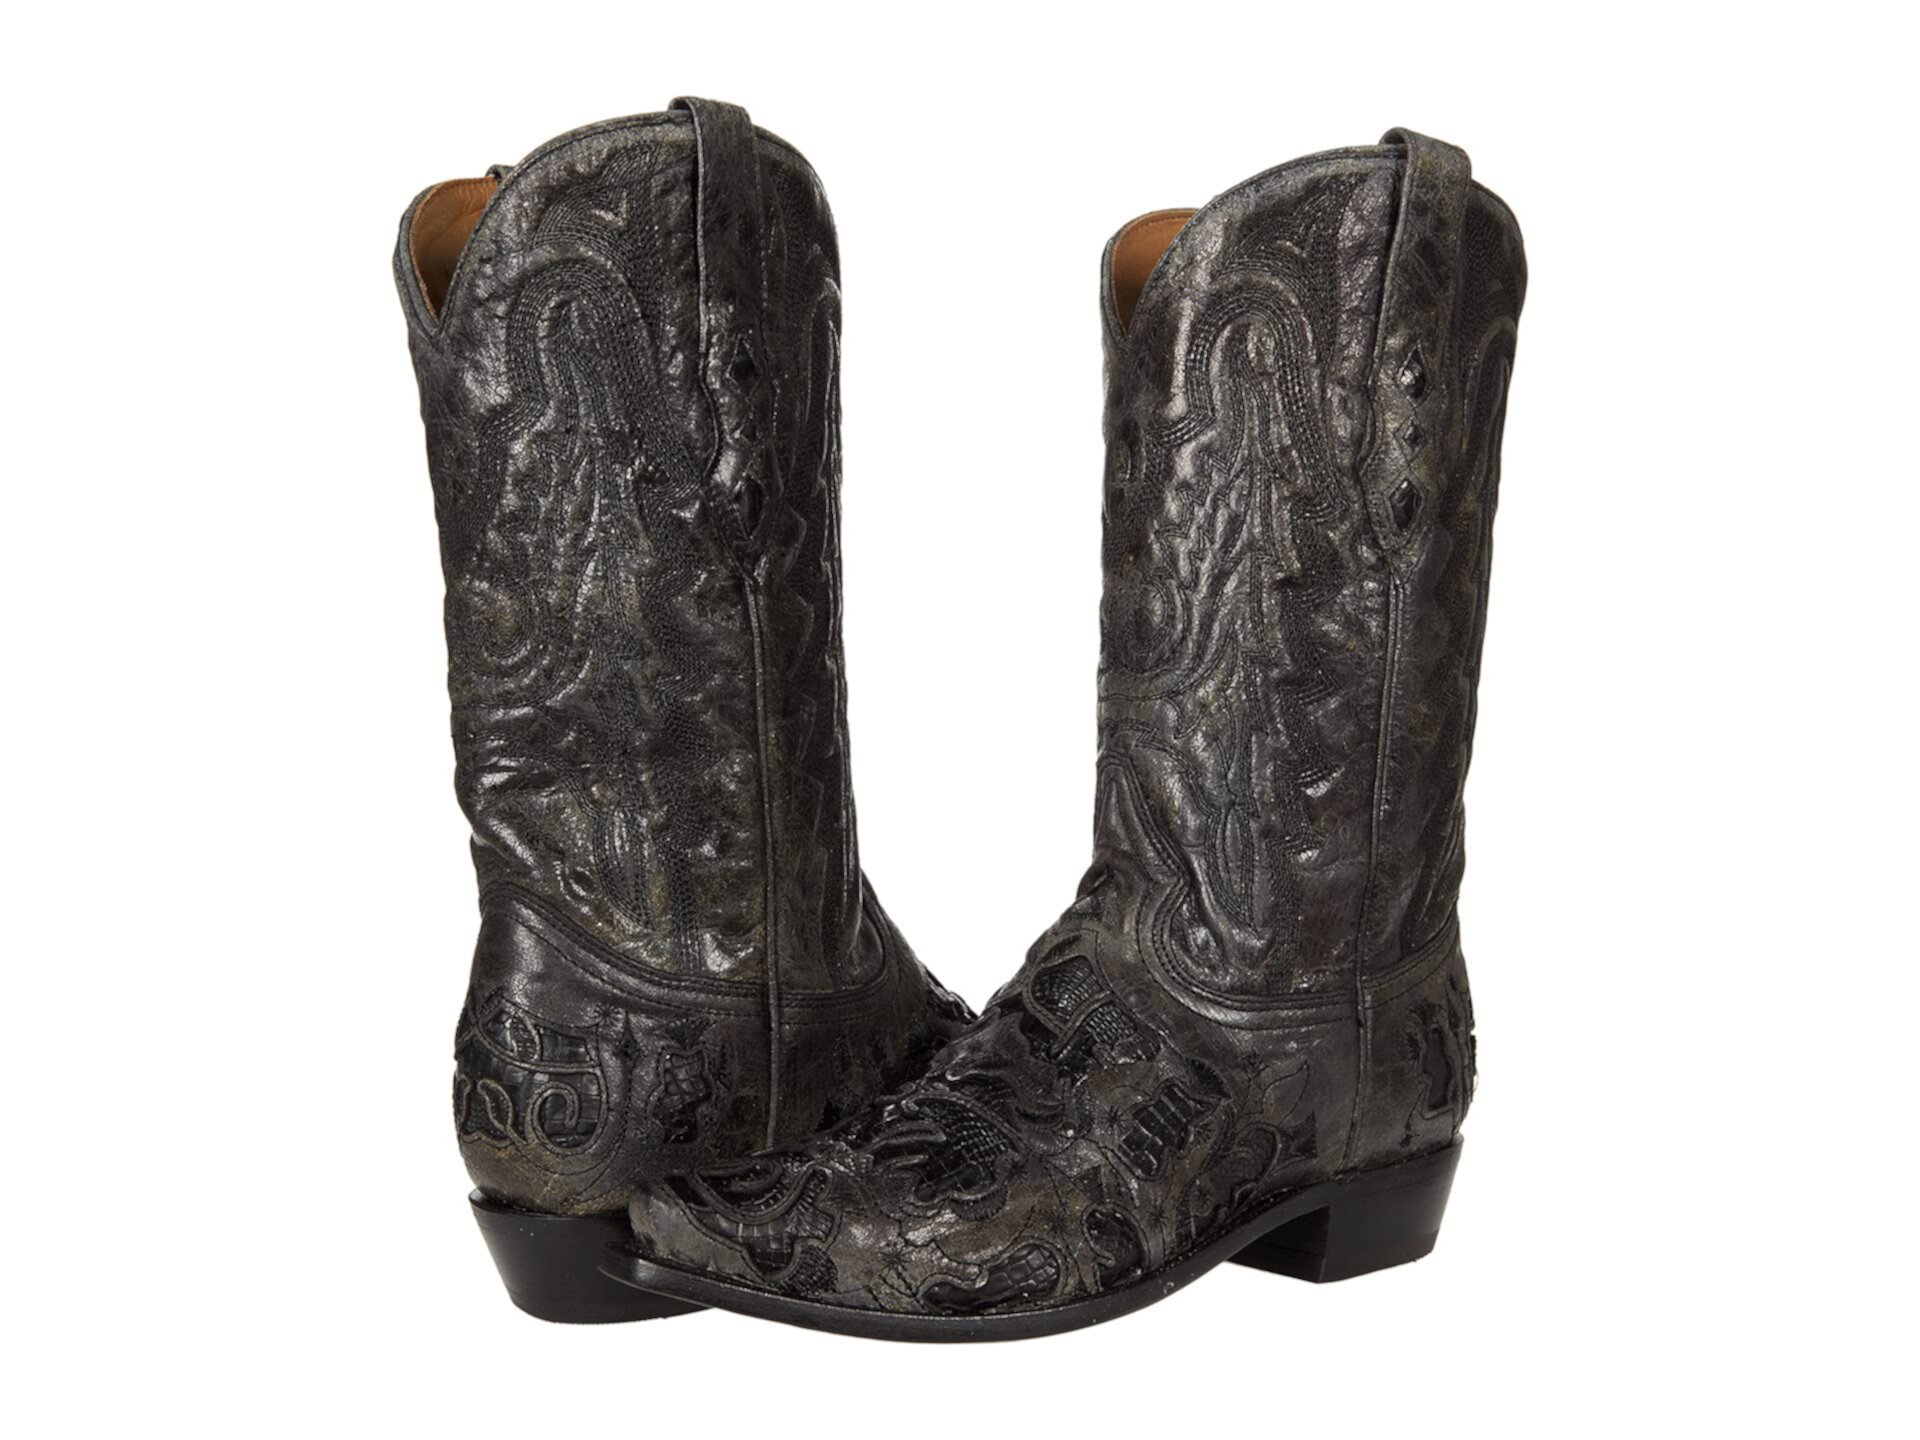 A4116 Corral Boots